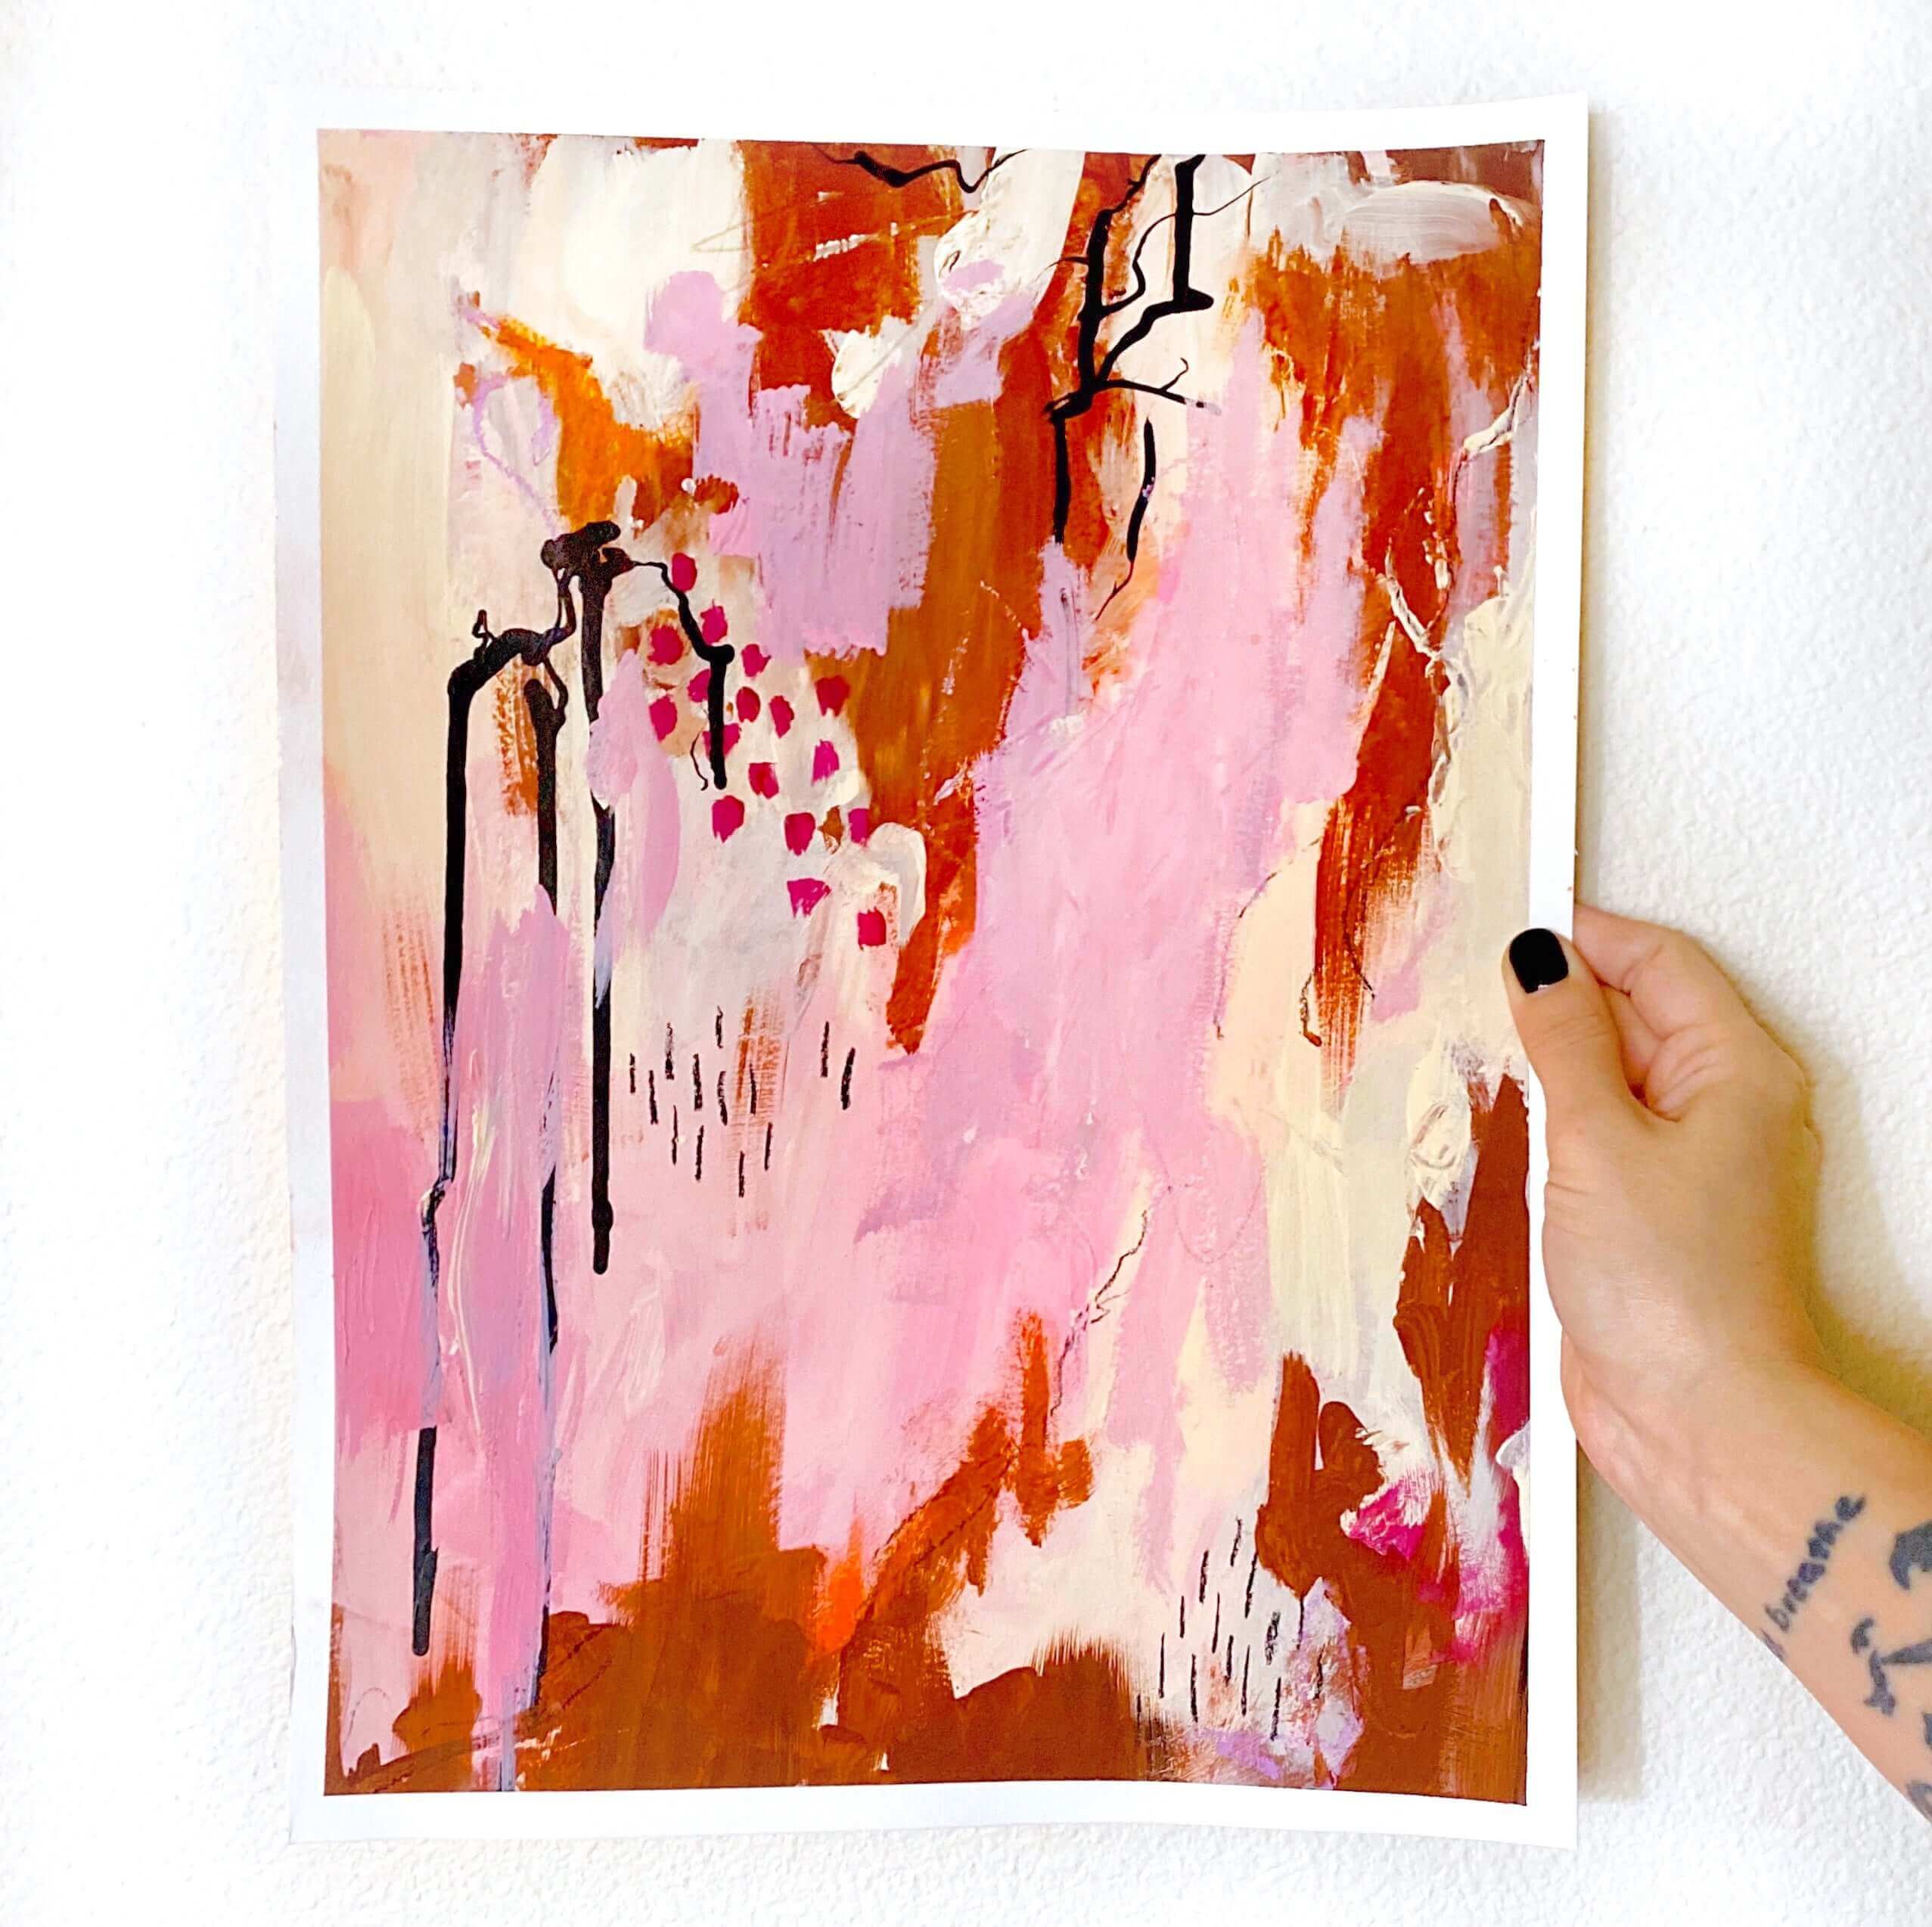 Original abstract artwork in pink and red